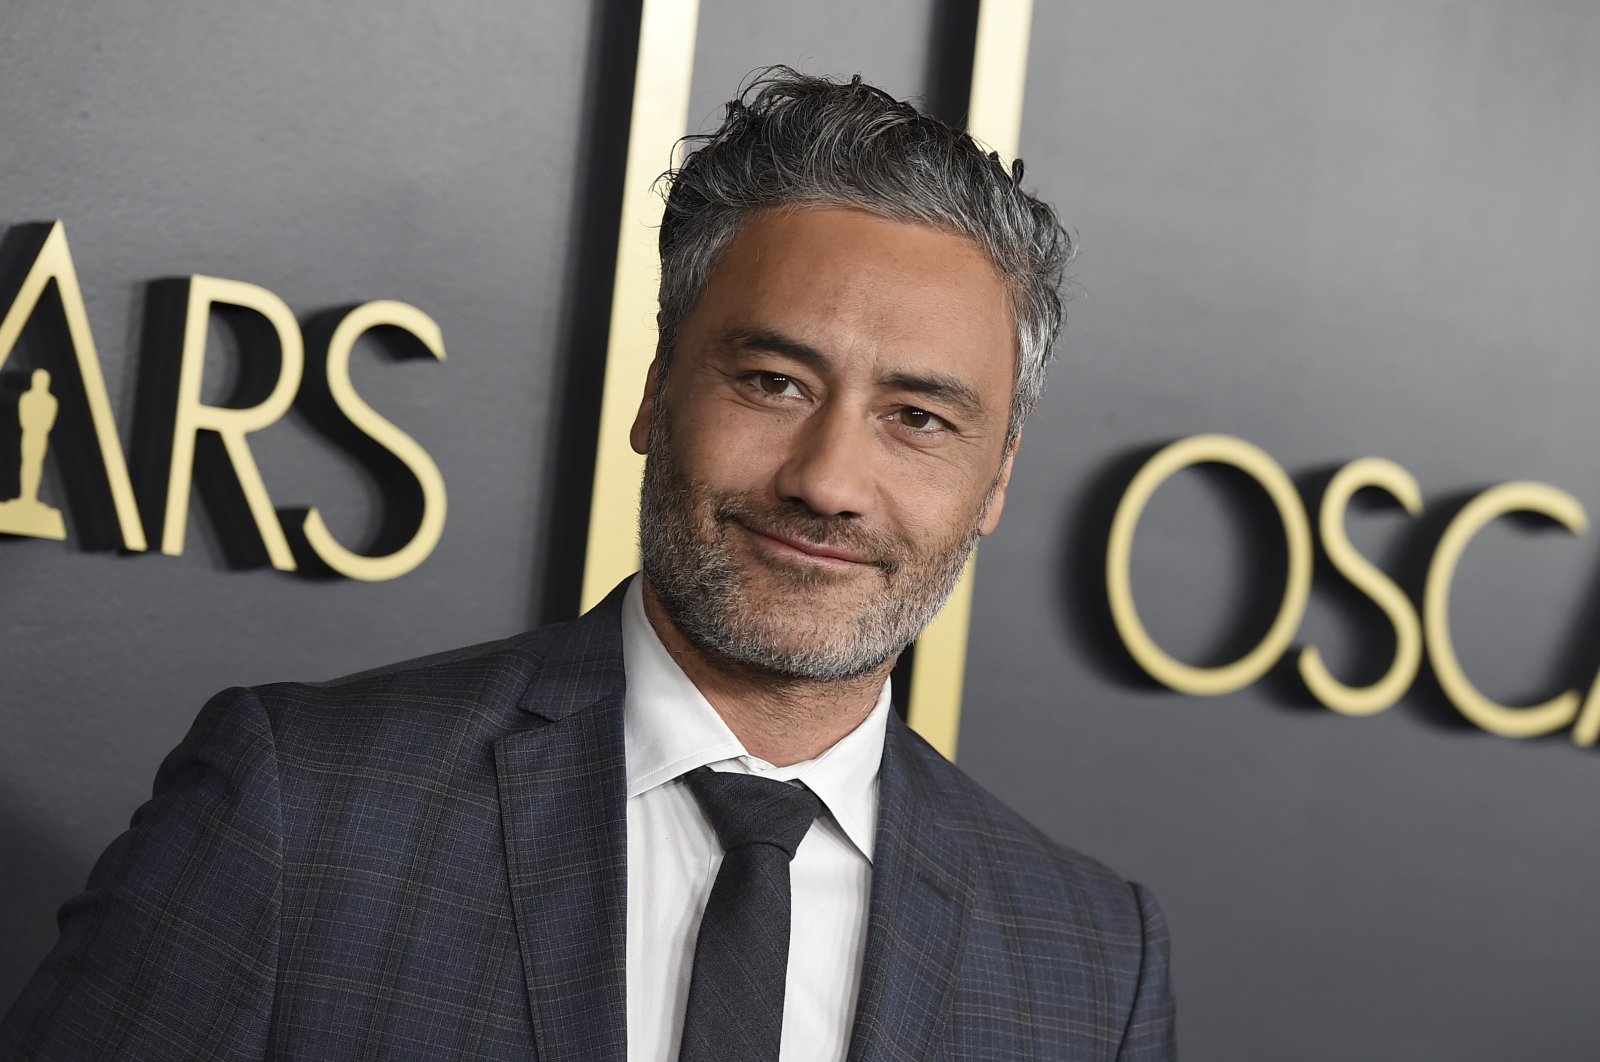 Taika Waititi at the 92nd Academy Awards Nominees Luncheon in Los Angeles, Jan. 27, 2020. (AP Photo)